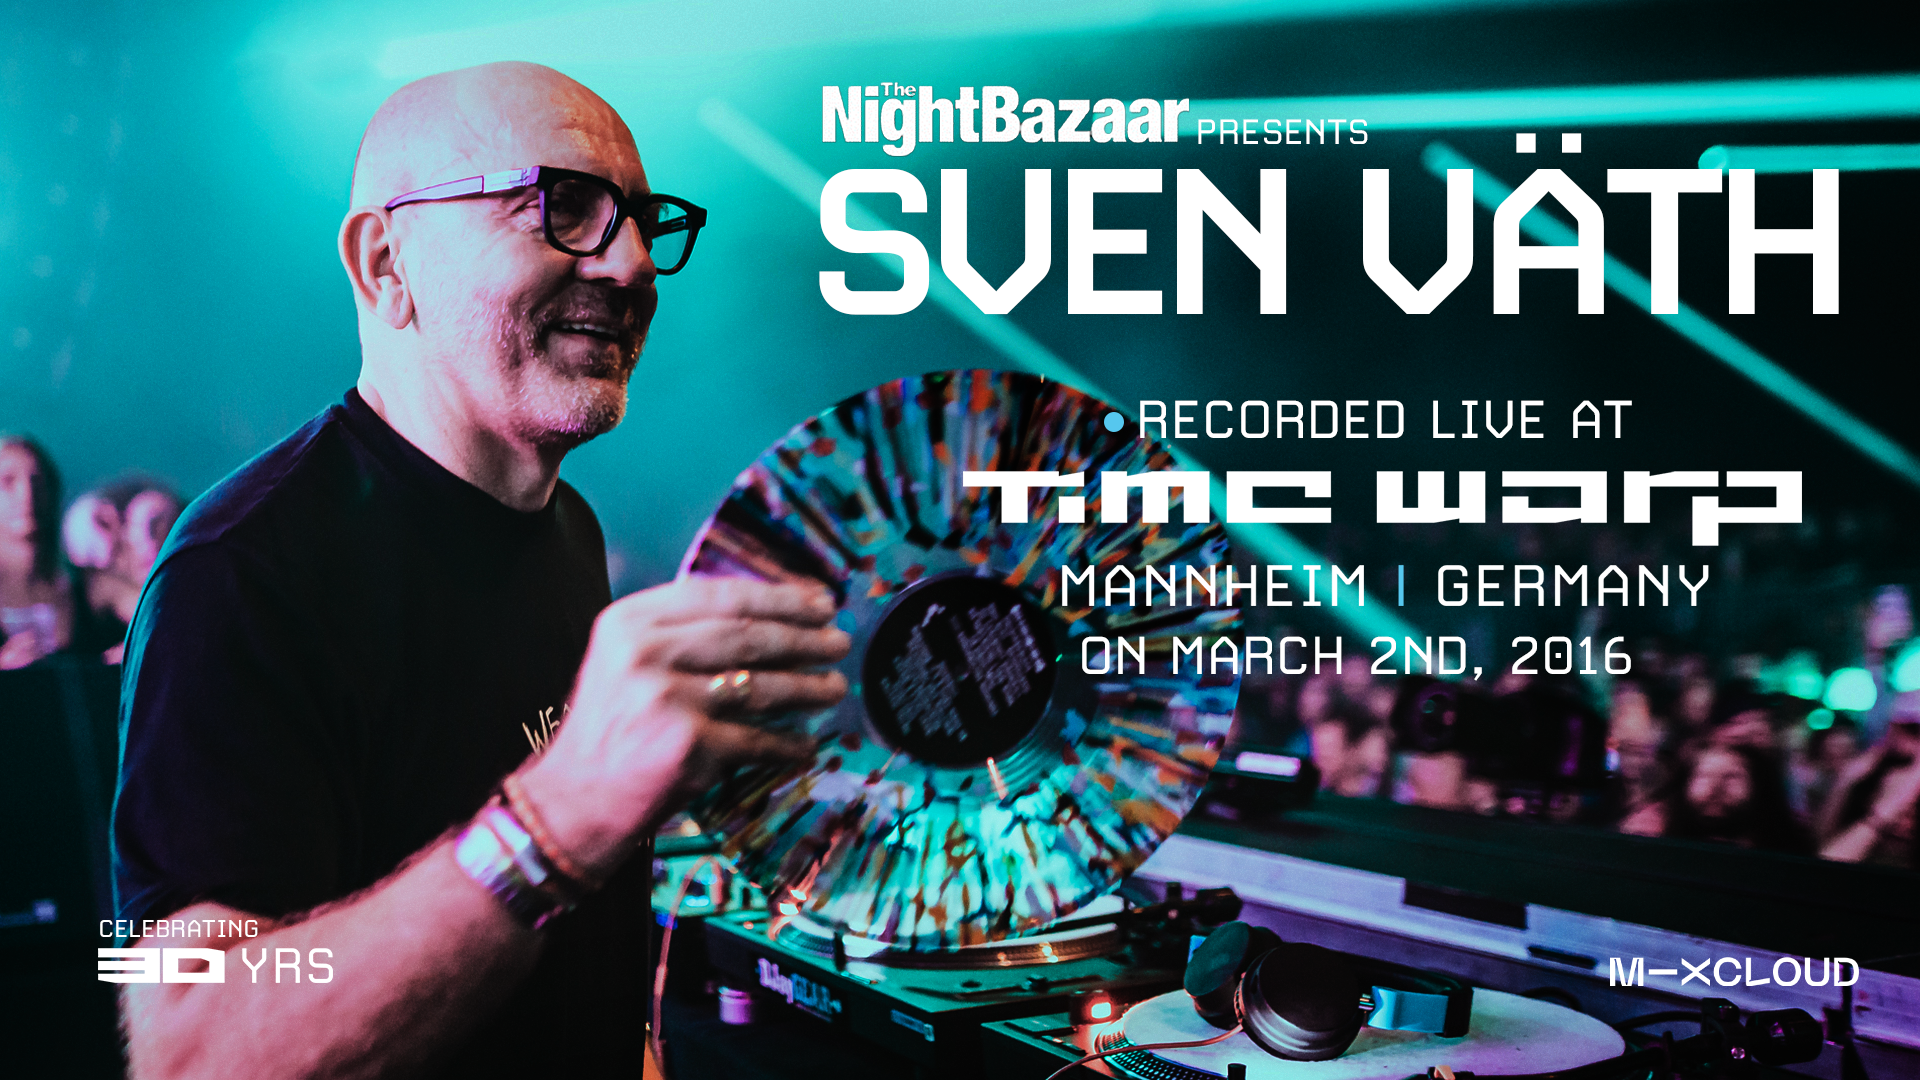 CLICK OR TAP IMAGE TO LISTEN TO A RECORDING OF SVEN VATH LIVE AT TIME WARP, RECORDED IN MANNHEIM, GERMANY ON MARCH 2ND 2016